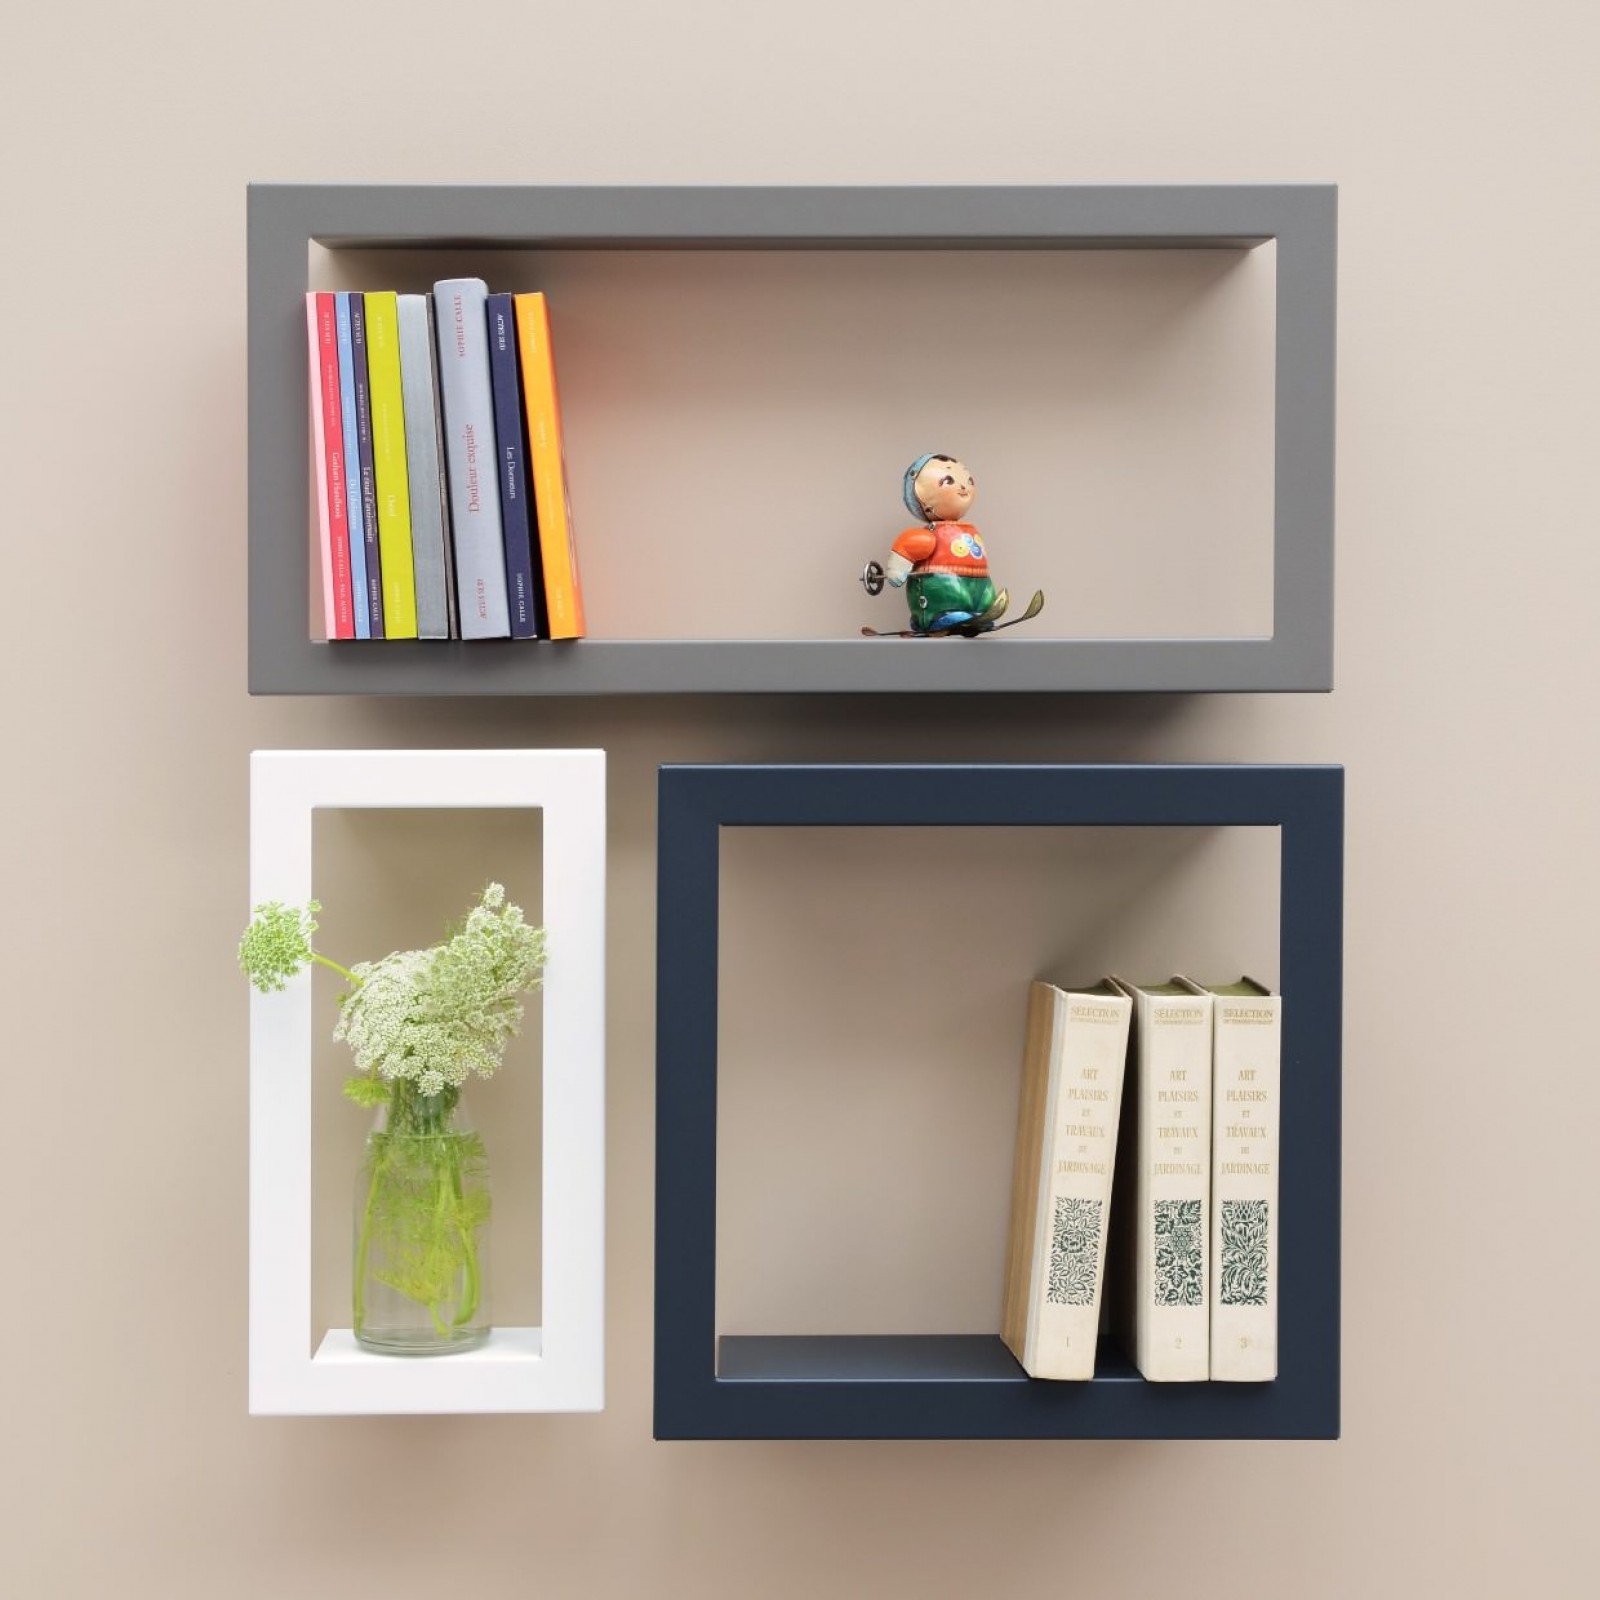 Wall-mounted shelf - STICK - presse-citron - contemporary / metal /  lacquered metal